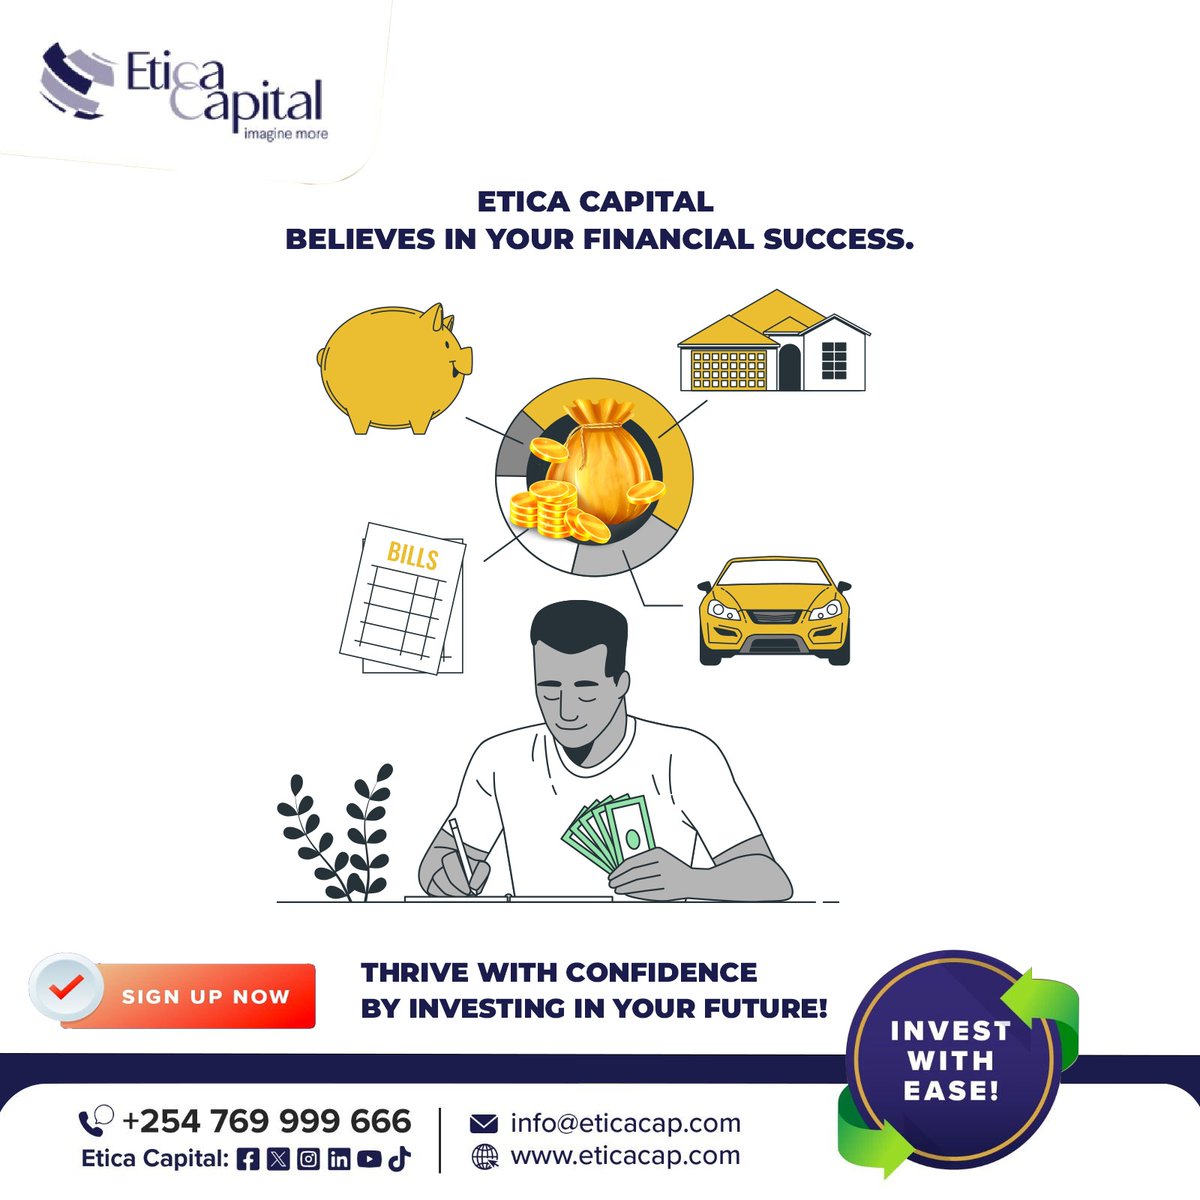 Etica Capital believes in your financial success.

Our Funds are designed for stability and consistent returns. Thrive with confidence by investing in your future!

Call or WhatsApp 0769 999666 or Visit eticacap.com

#InvestWithEase #EticaCapital #WealthTech